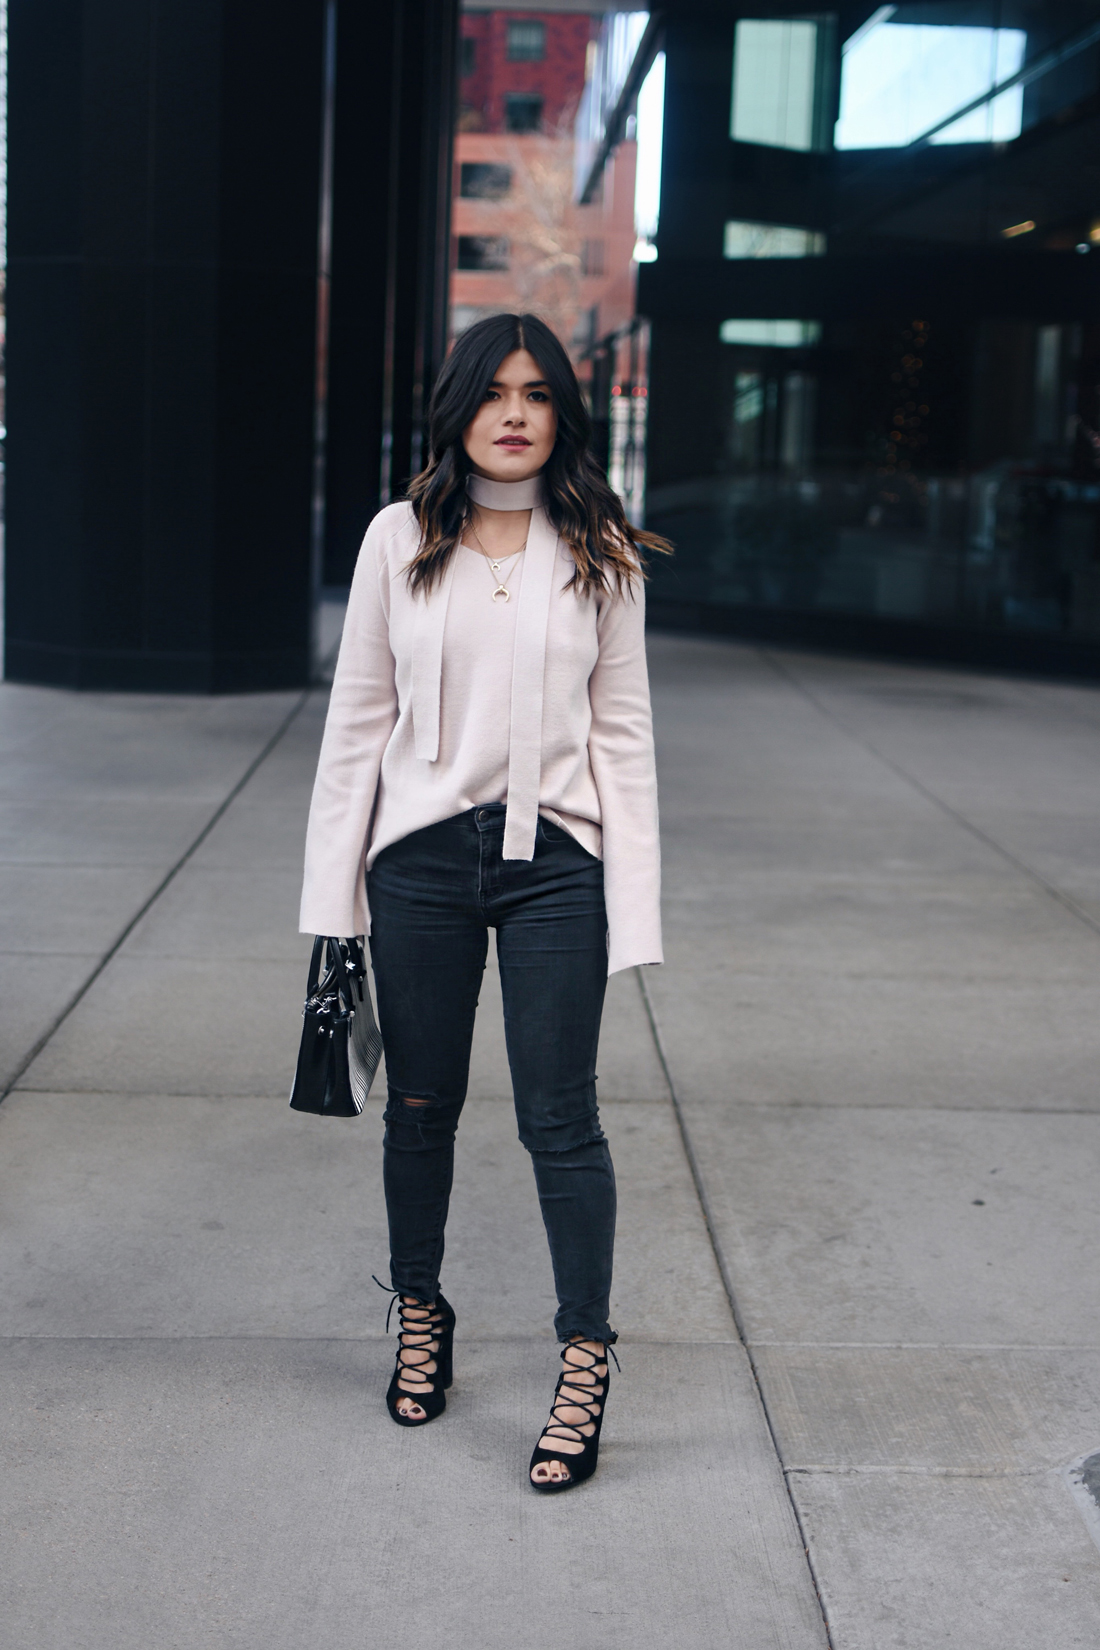 Carolina Hellal of Chic Talk wearing a Chicwish bell sleeve sweater, Madewell ripped jeans, Topshop leather jacket, and Public Desire sandals.